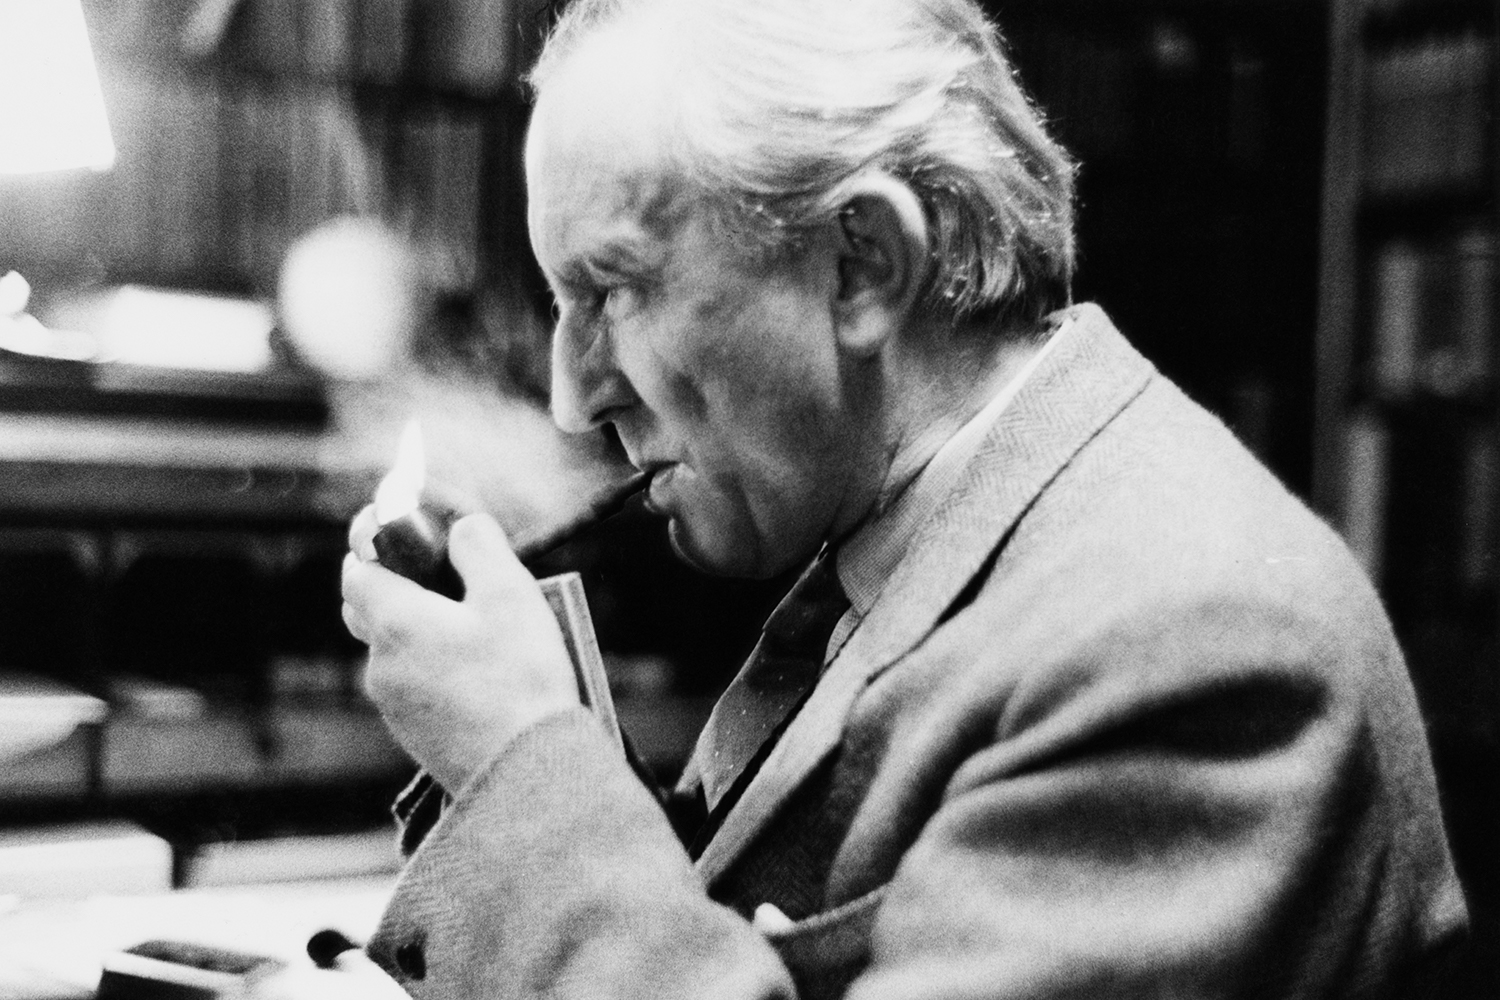 J.R.R. Tolkien smoking a pipe at Oxford in December 1955, a couple years after he completed his translation of "Sir Gawain and the Green Knight."